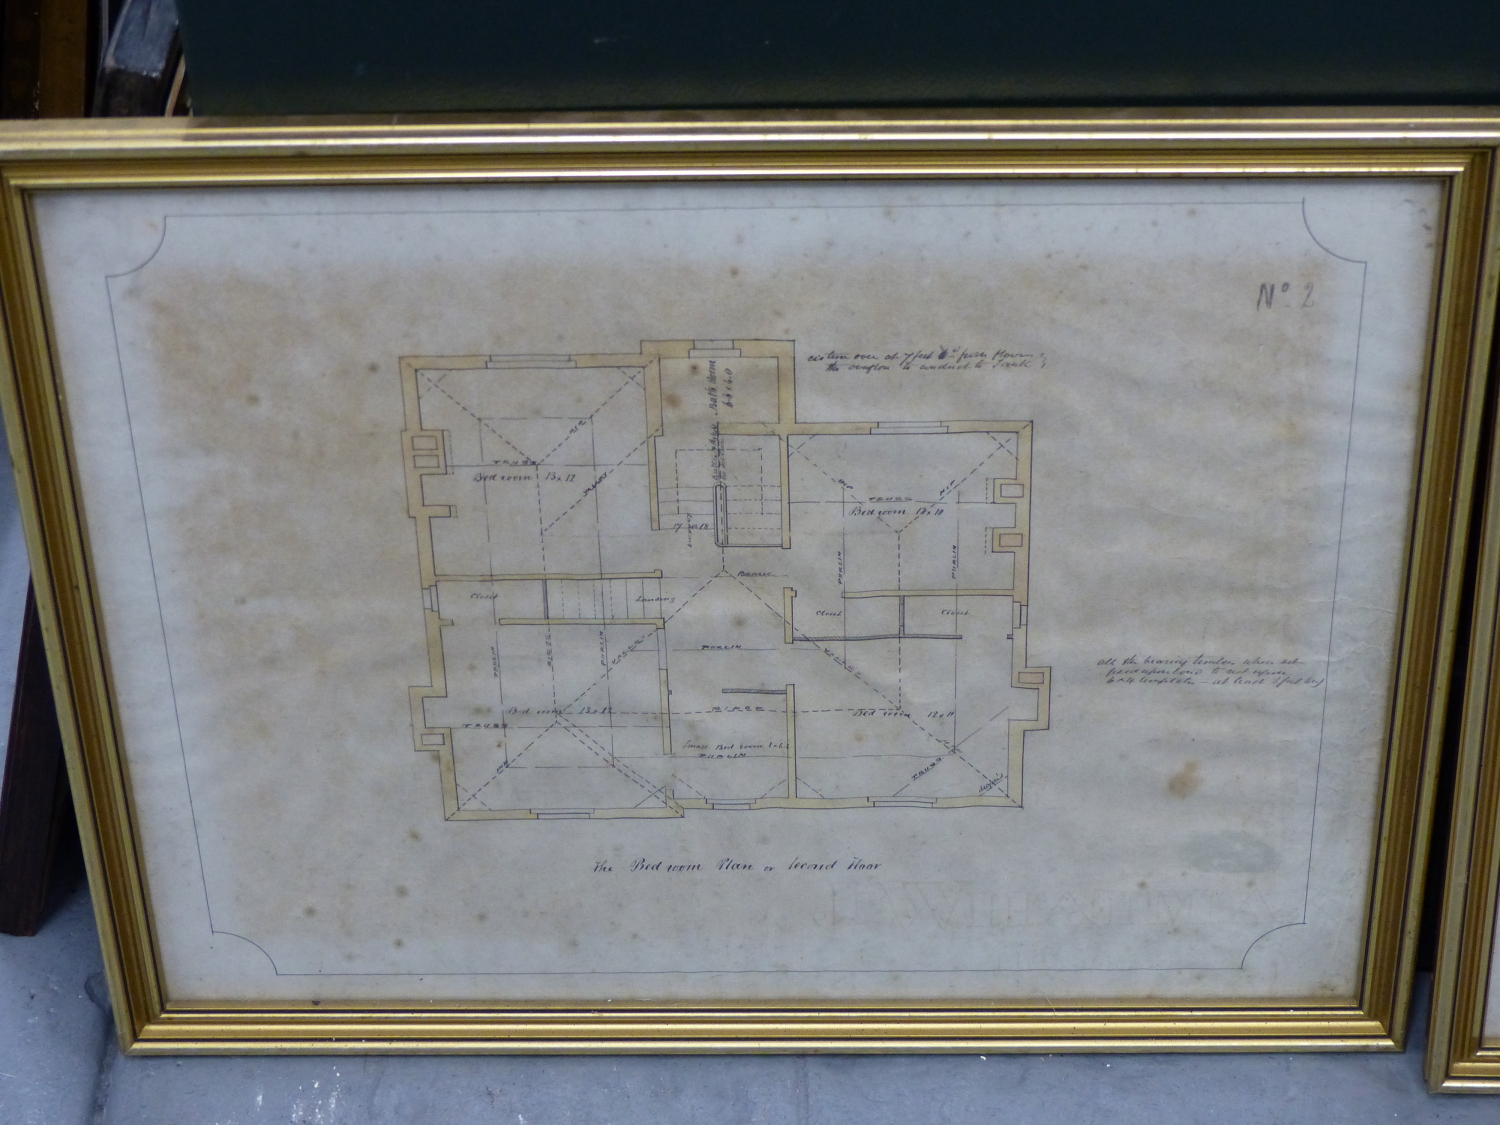 ARCHITECTURAL PLANS, AN INTERESTING SET OF MID 19TH CENTURY ARCHITECTS PLANS FOR AN IMPRESSIVE - Image 5 of 7